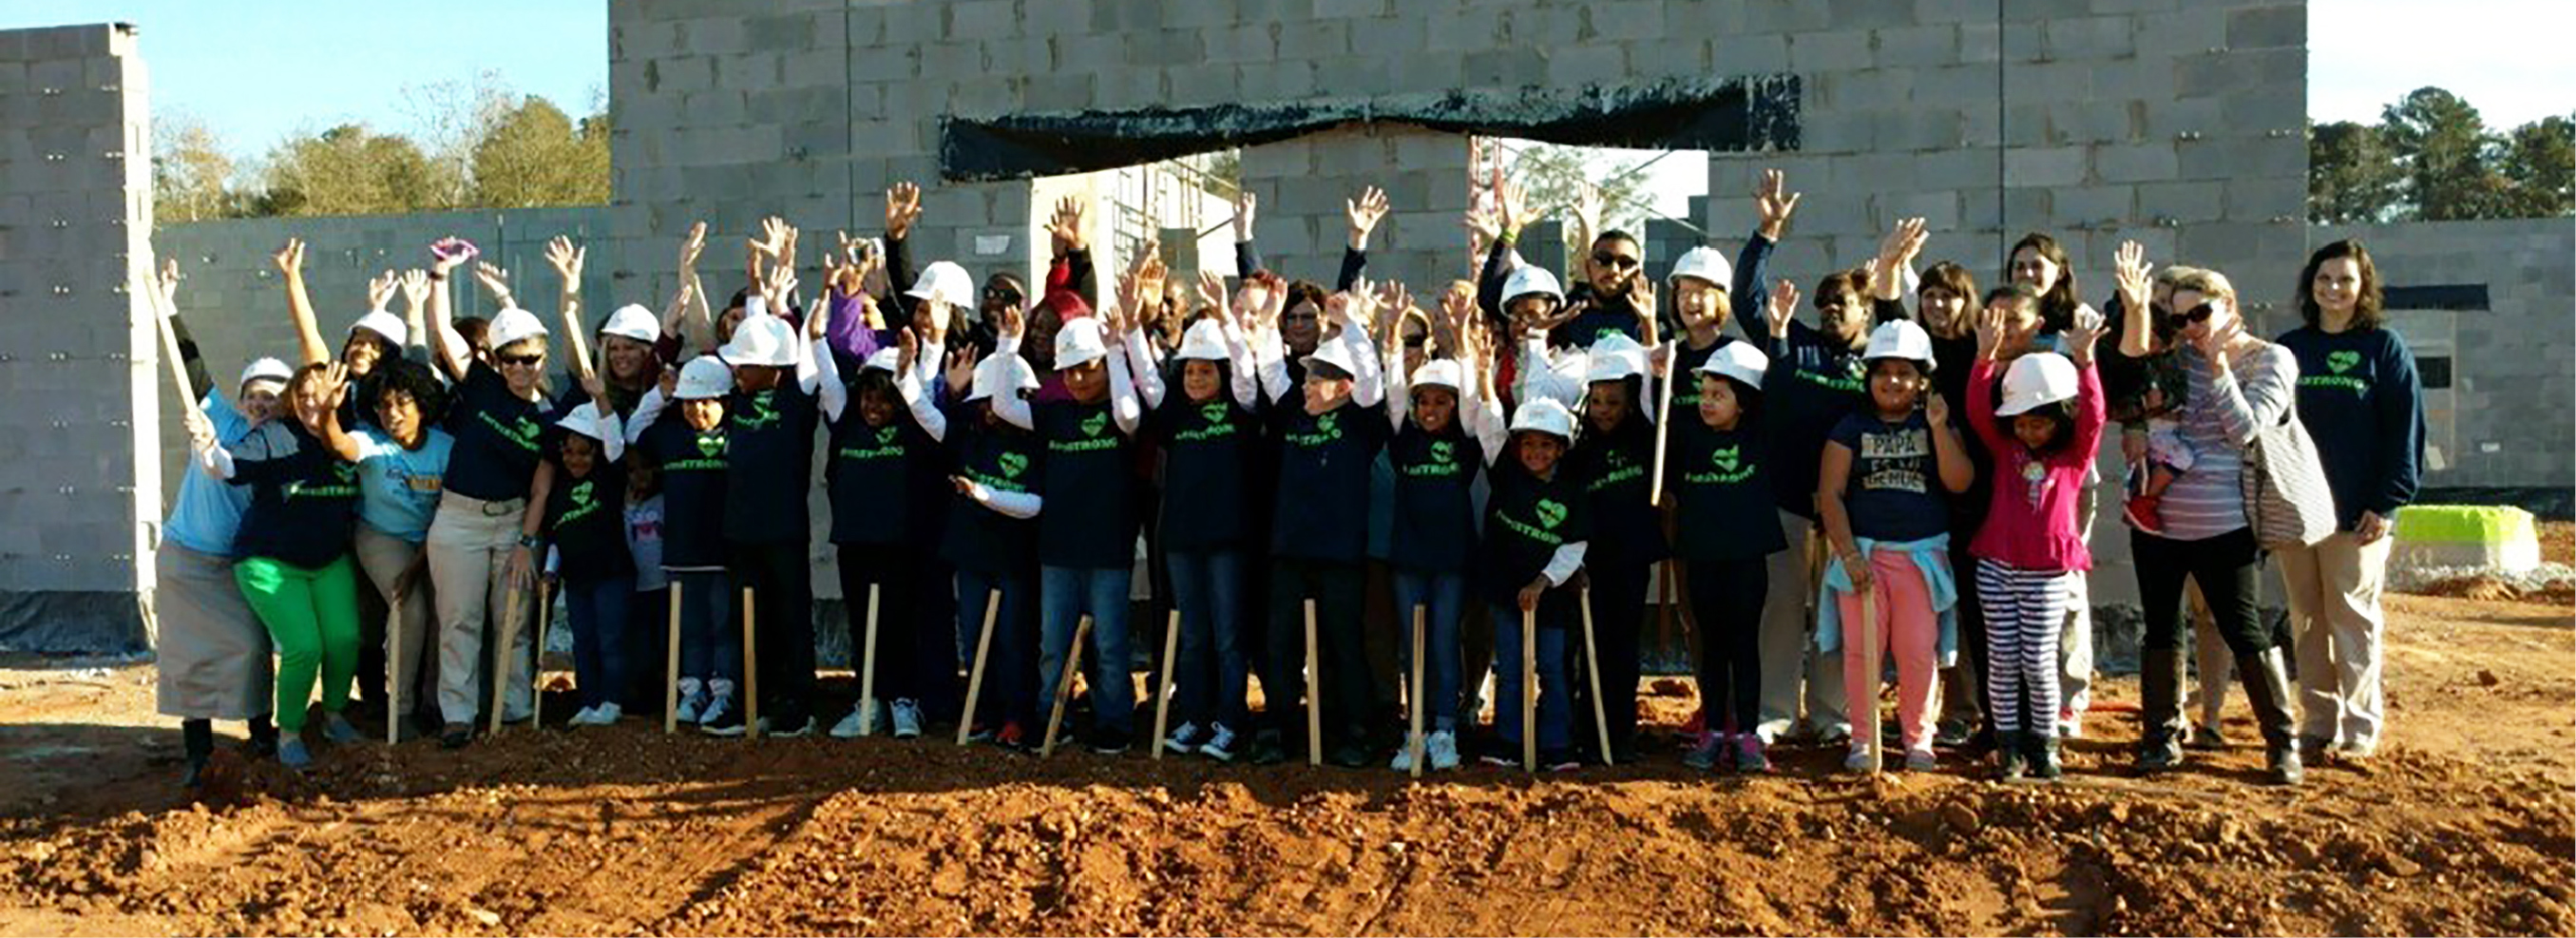 Troup Elementary Groundbreaking Feature Image3